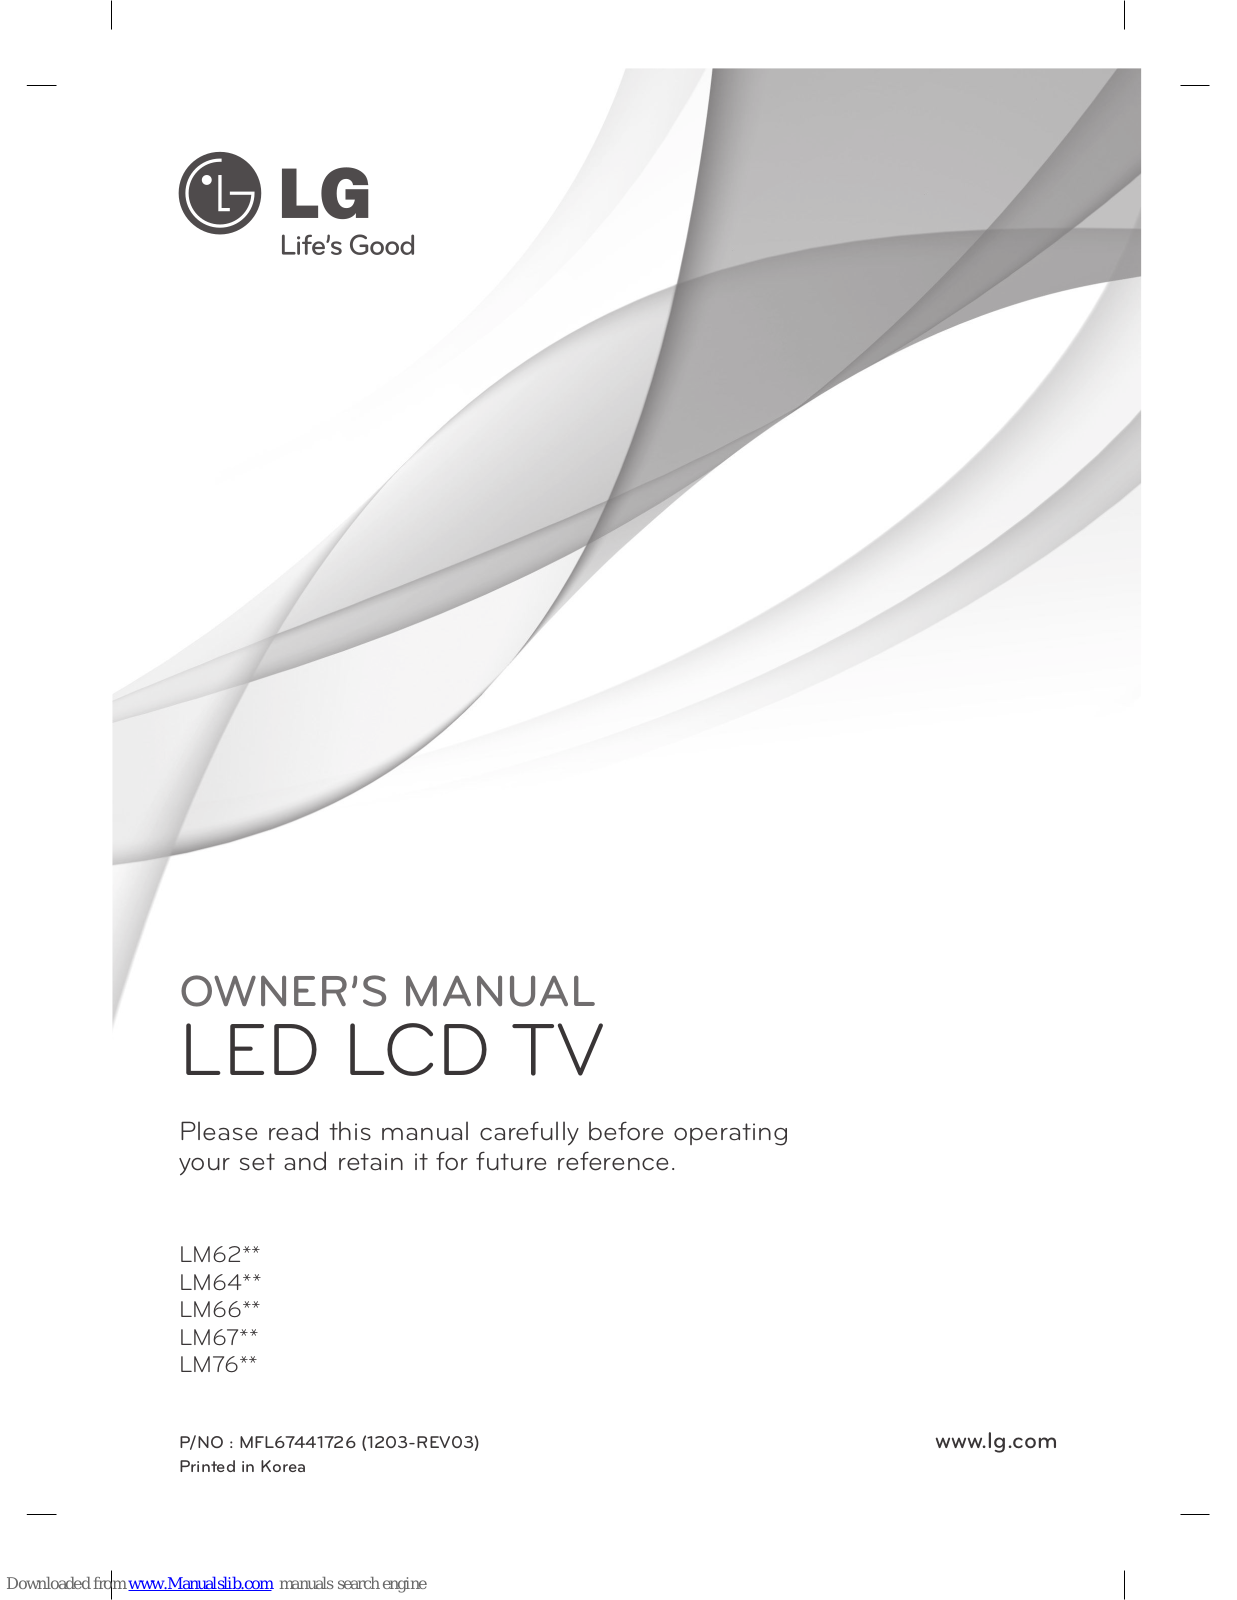 LG 42LM661, 42LM669, 47LM660, 47LM64, 55LM64 Owner's Manual